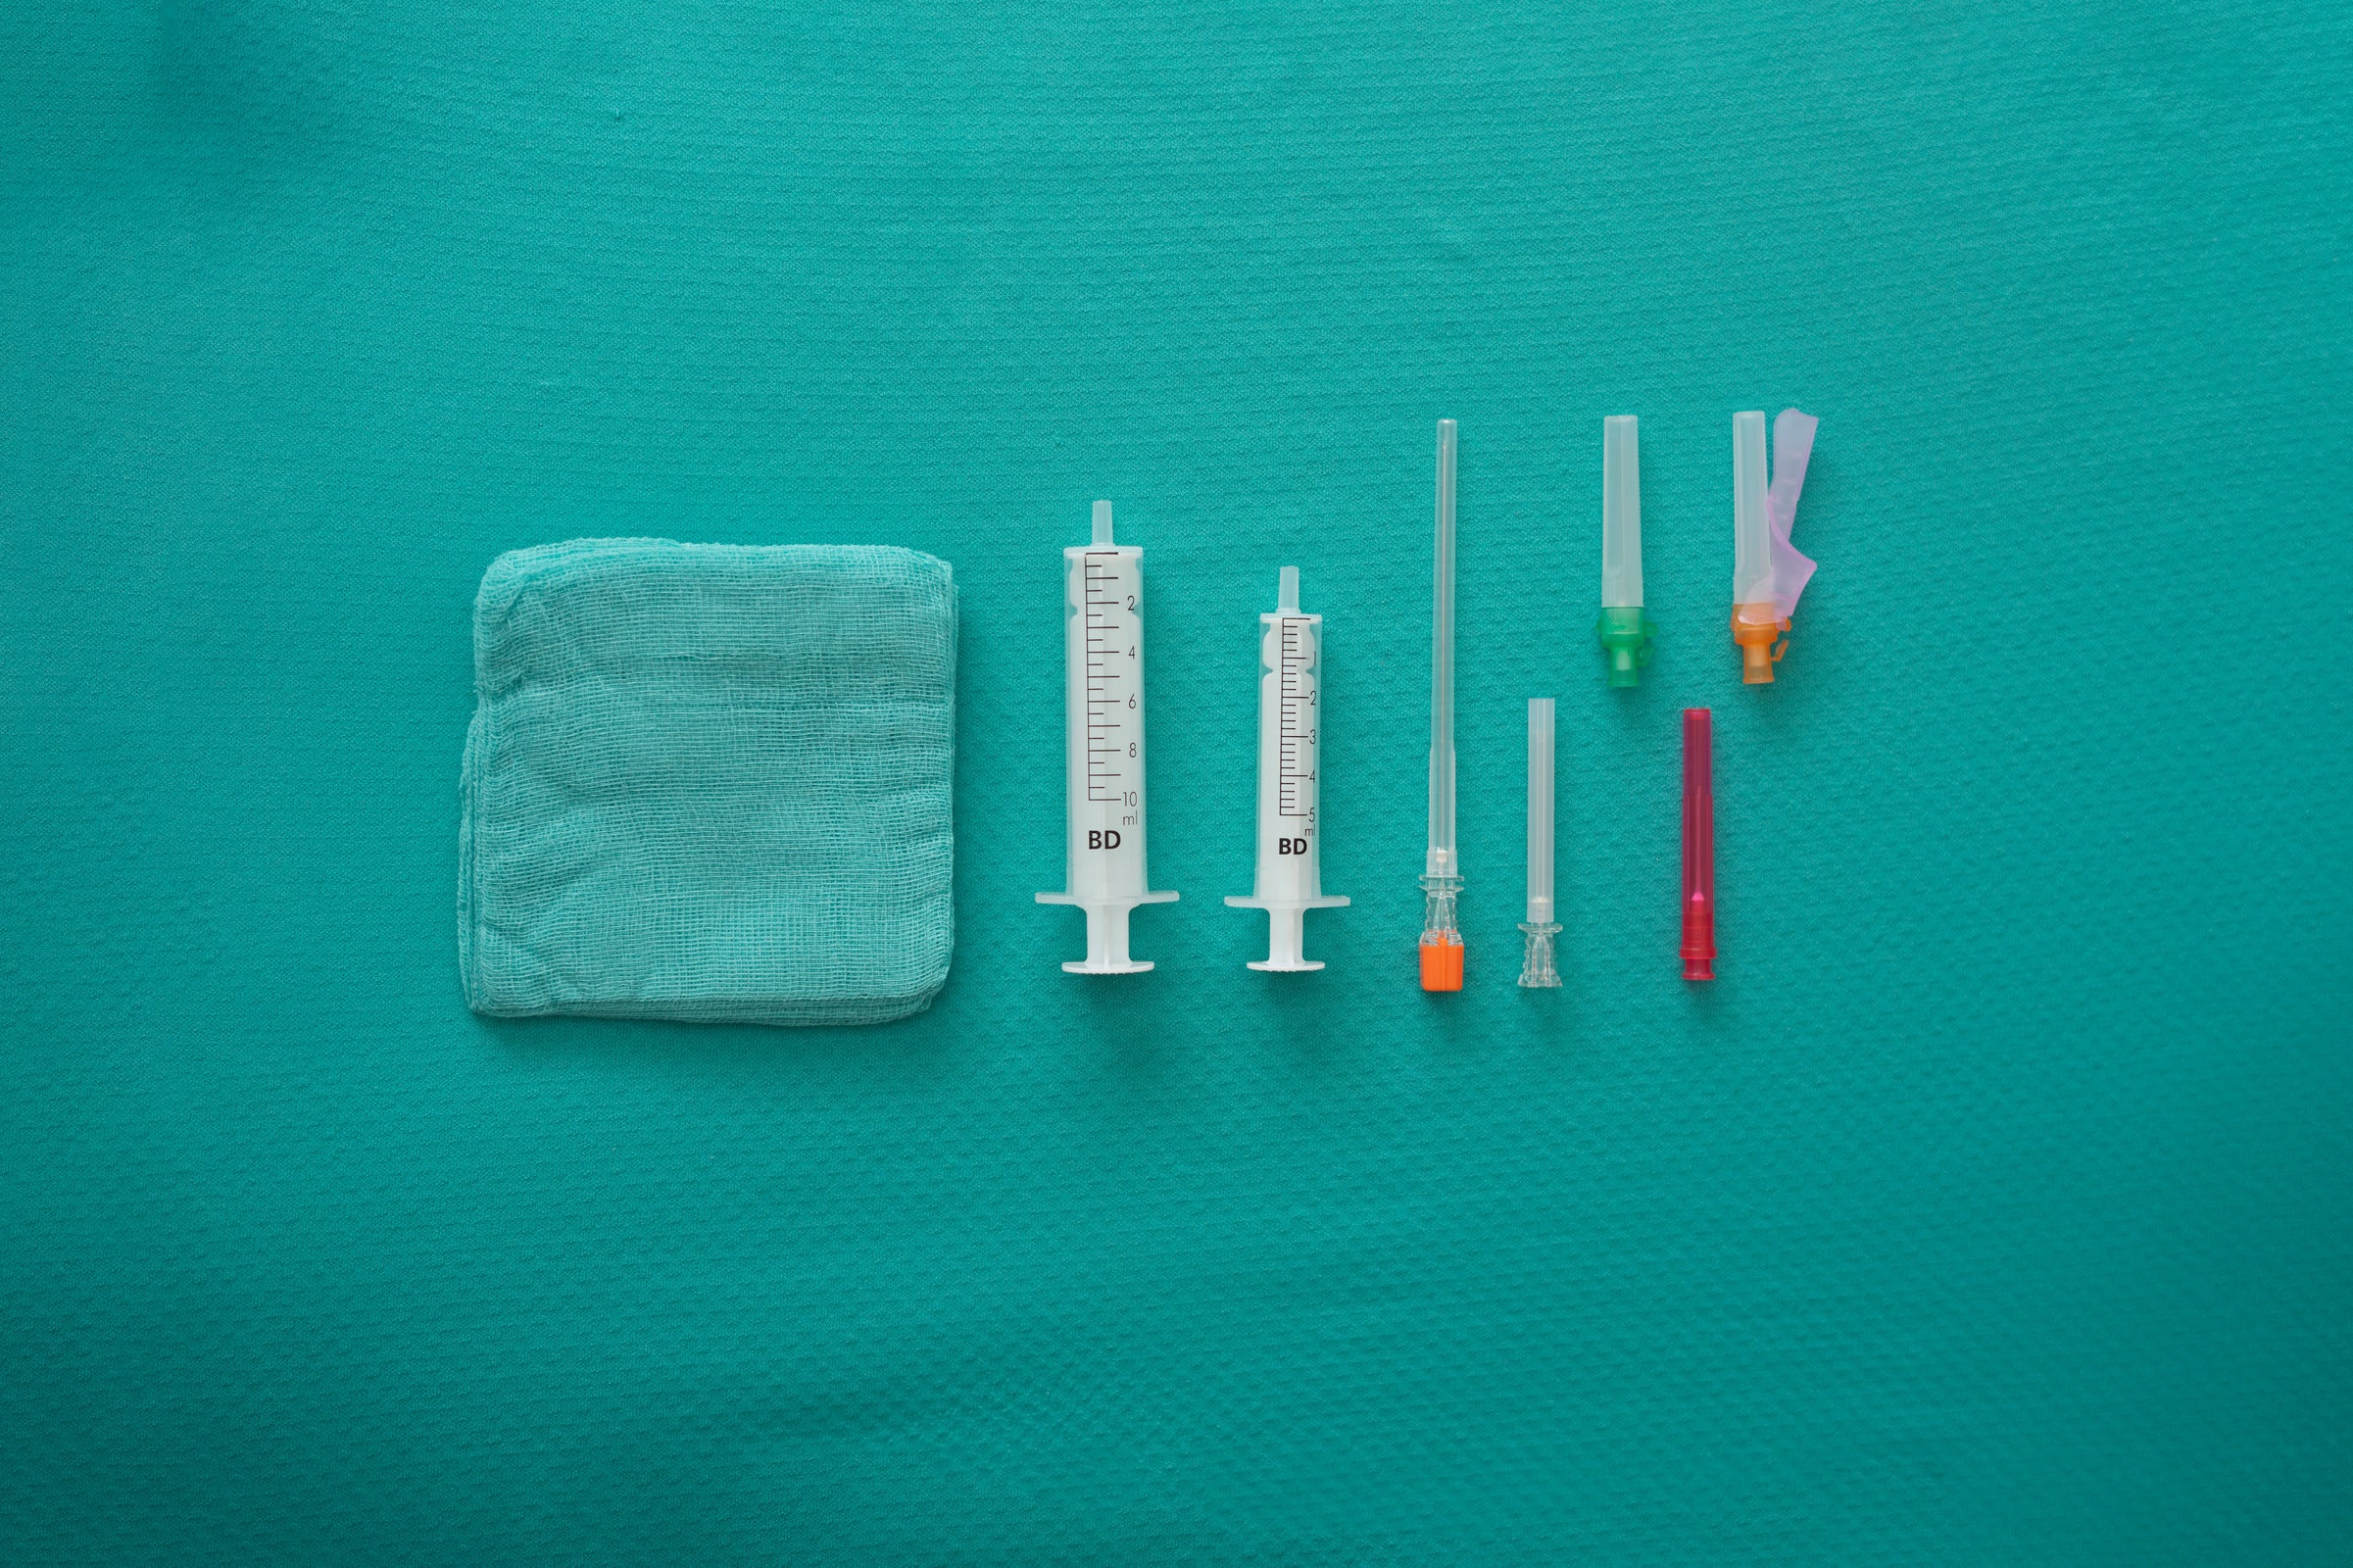 The injection site for spinal anesthesia